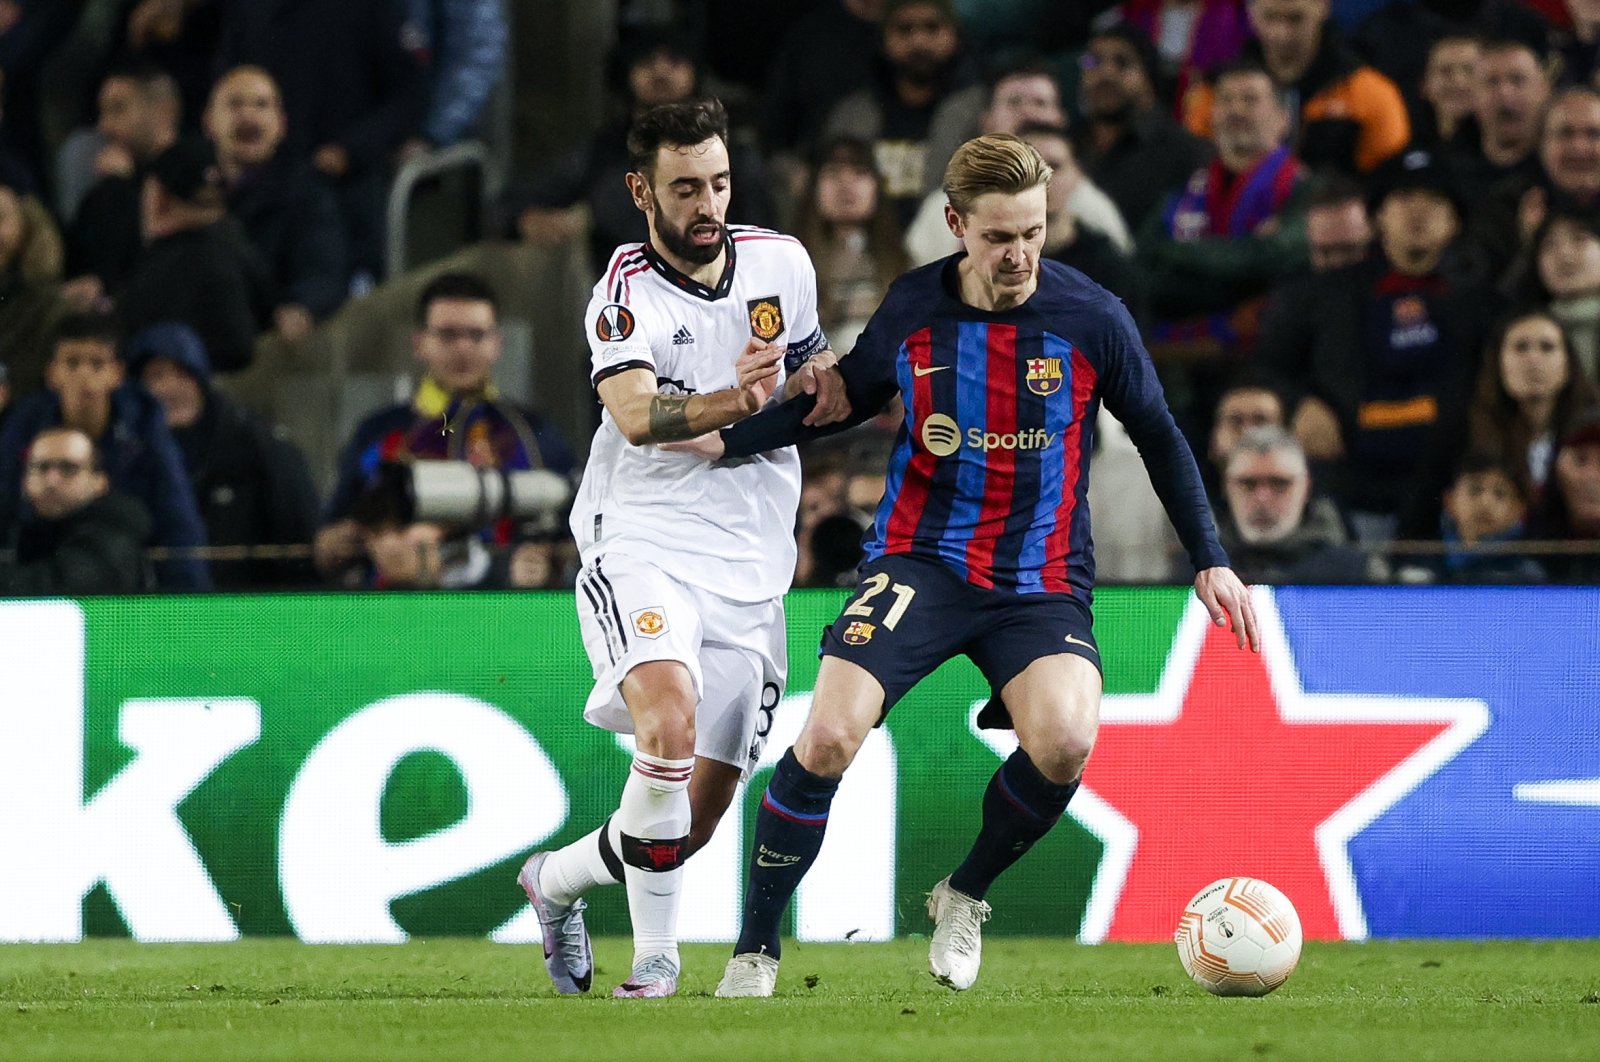 Manchester United&#039;s Bruno Fernandes (L) in action against Barcelona&#039;s Frenkie de Jong during the UEFA Europa League match at Camp Nou, Barcelona, Spain, Feb. 16, 2023. (Getty Images Photo)